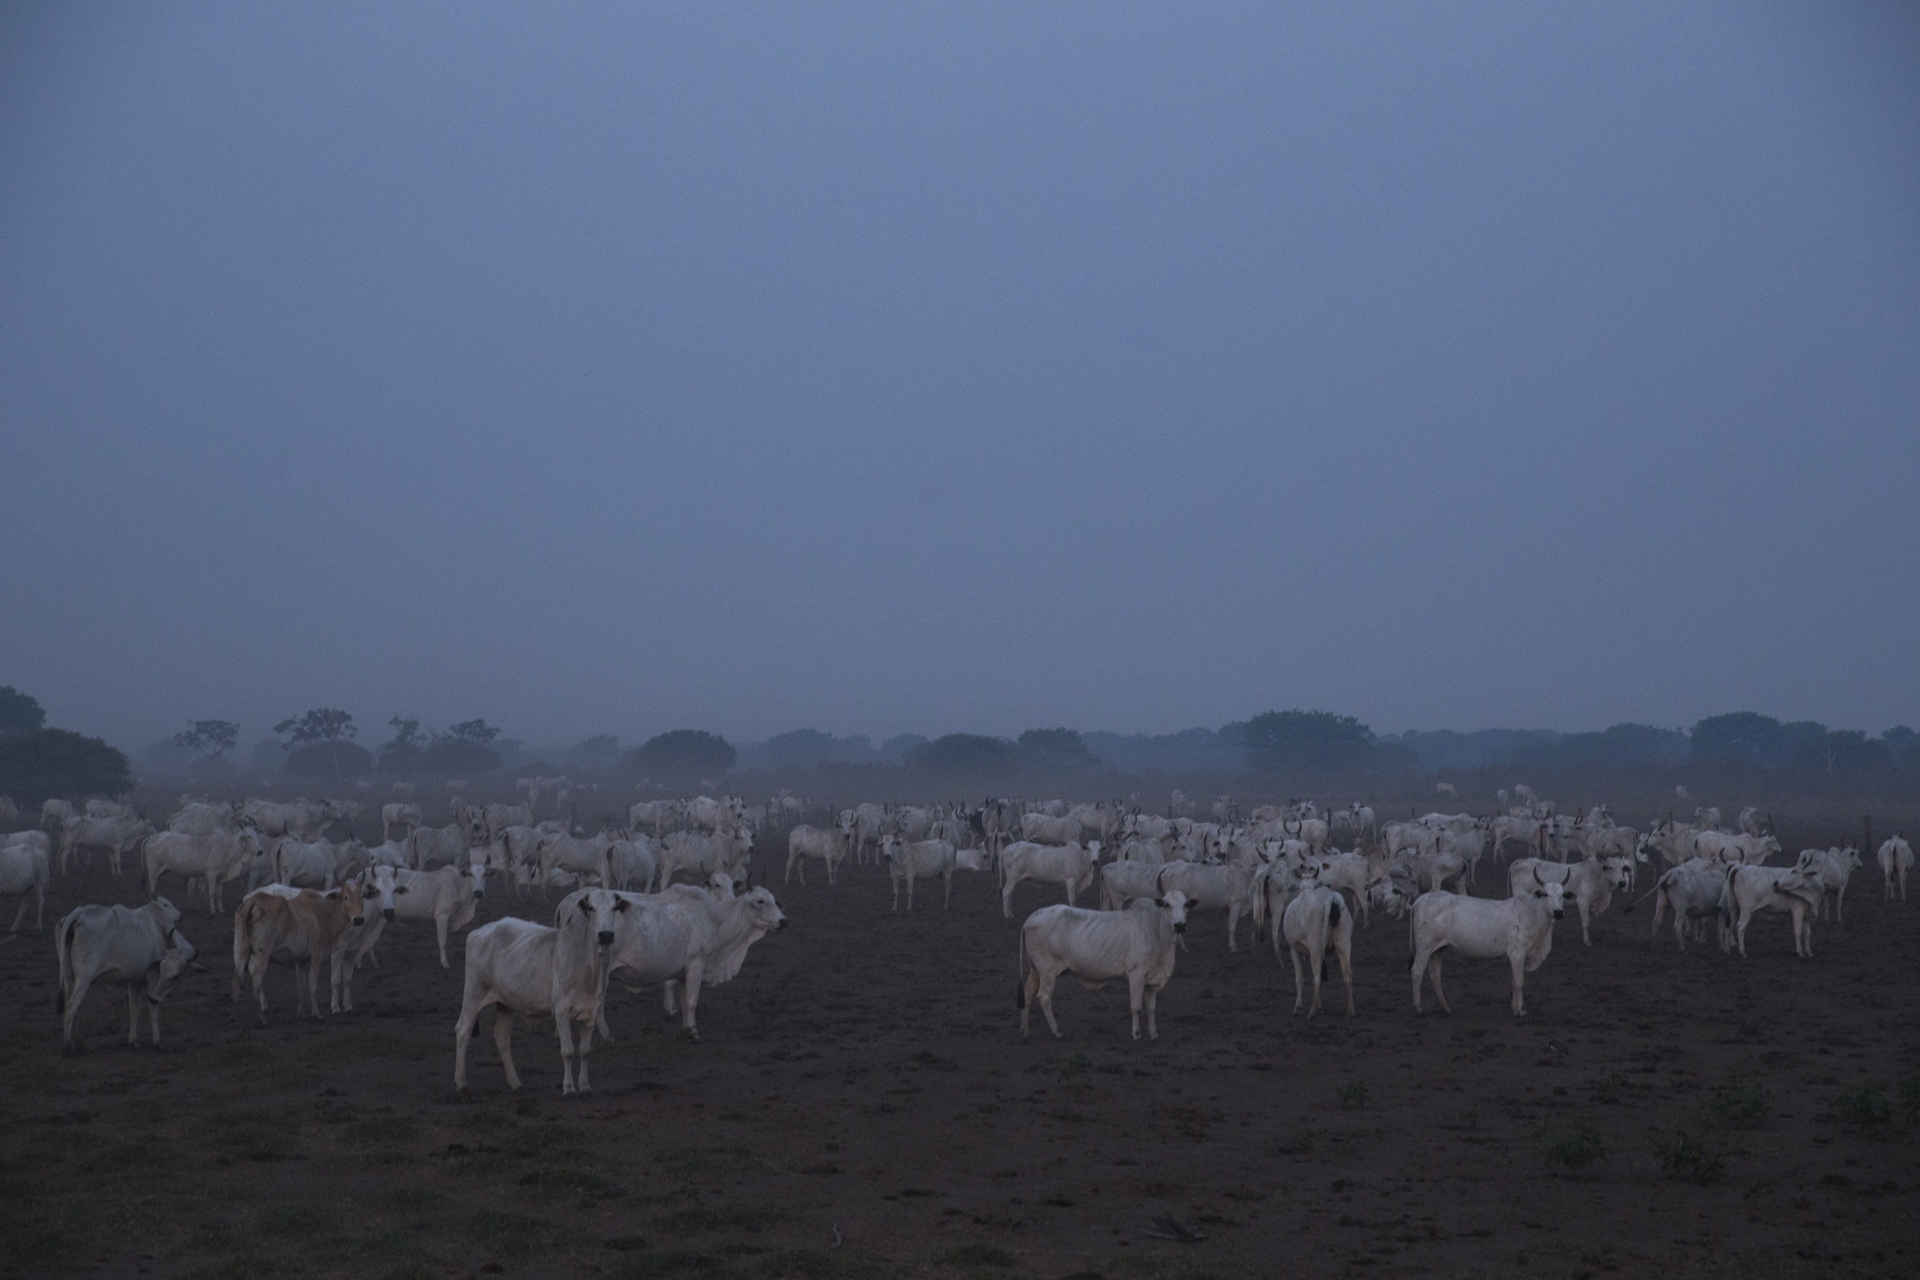  Hundreds of cattle wait at dusk, shrouded by smoke from nearby fires.&nbsp; 